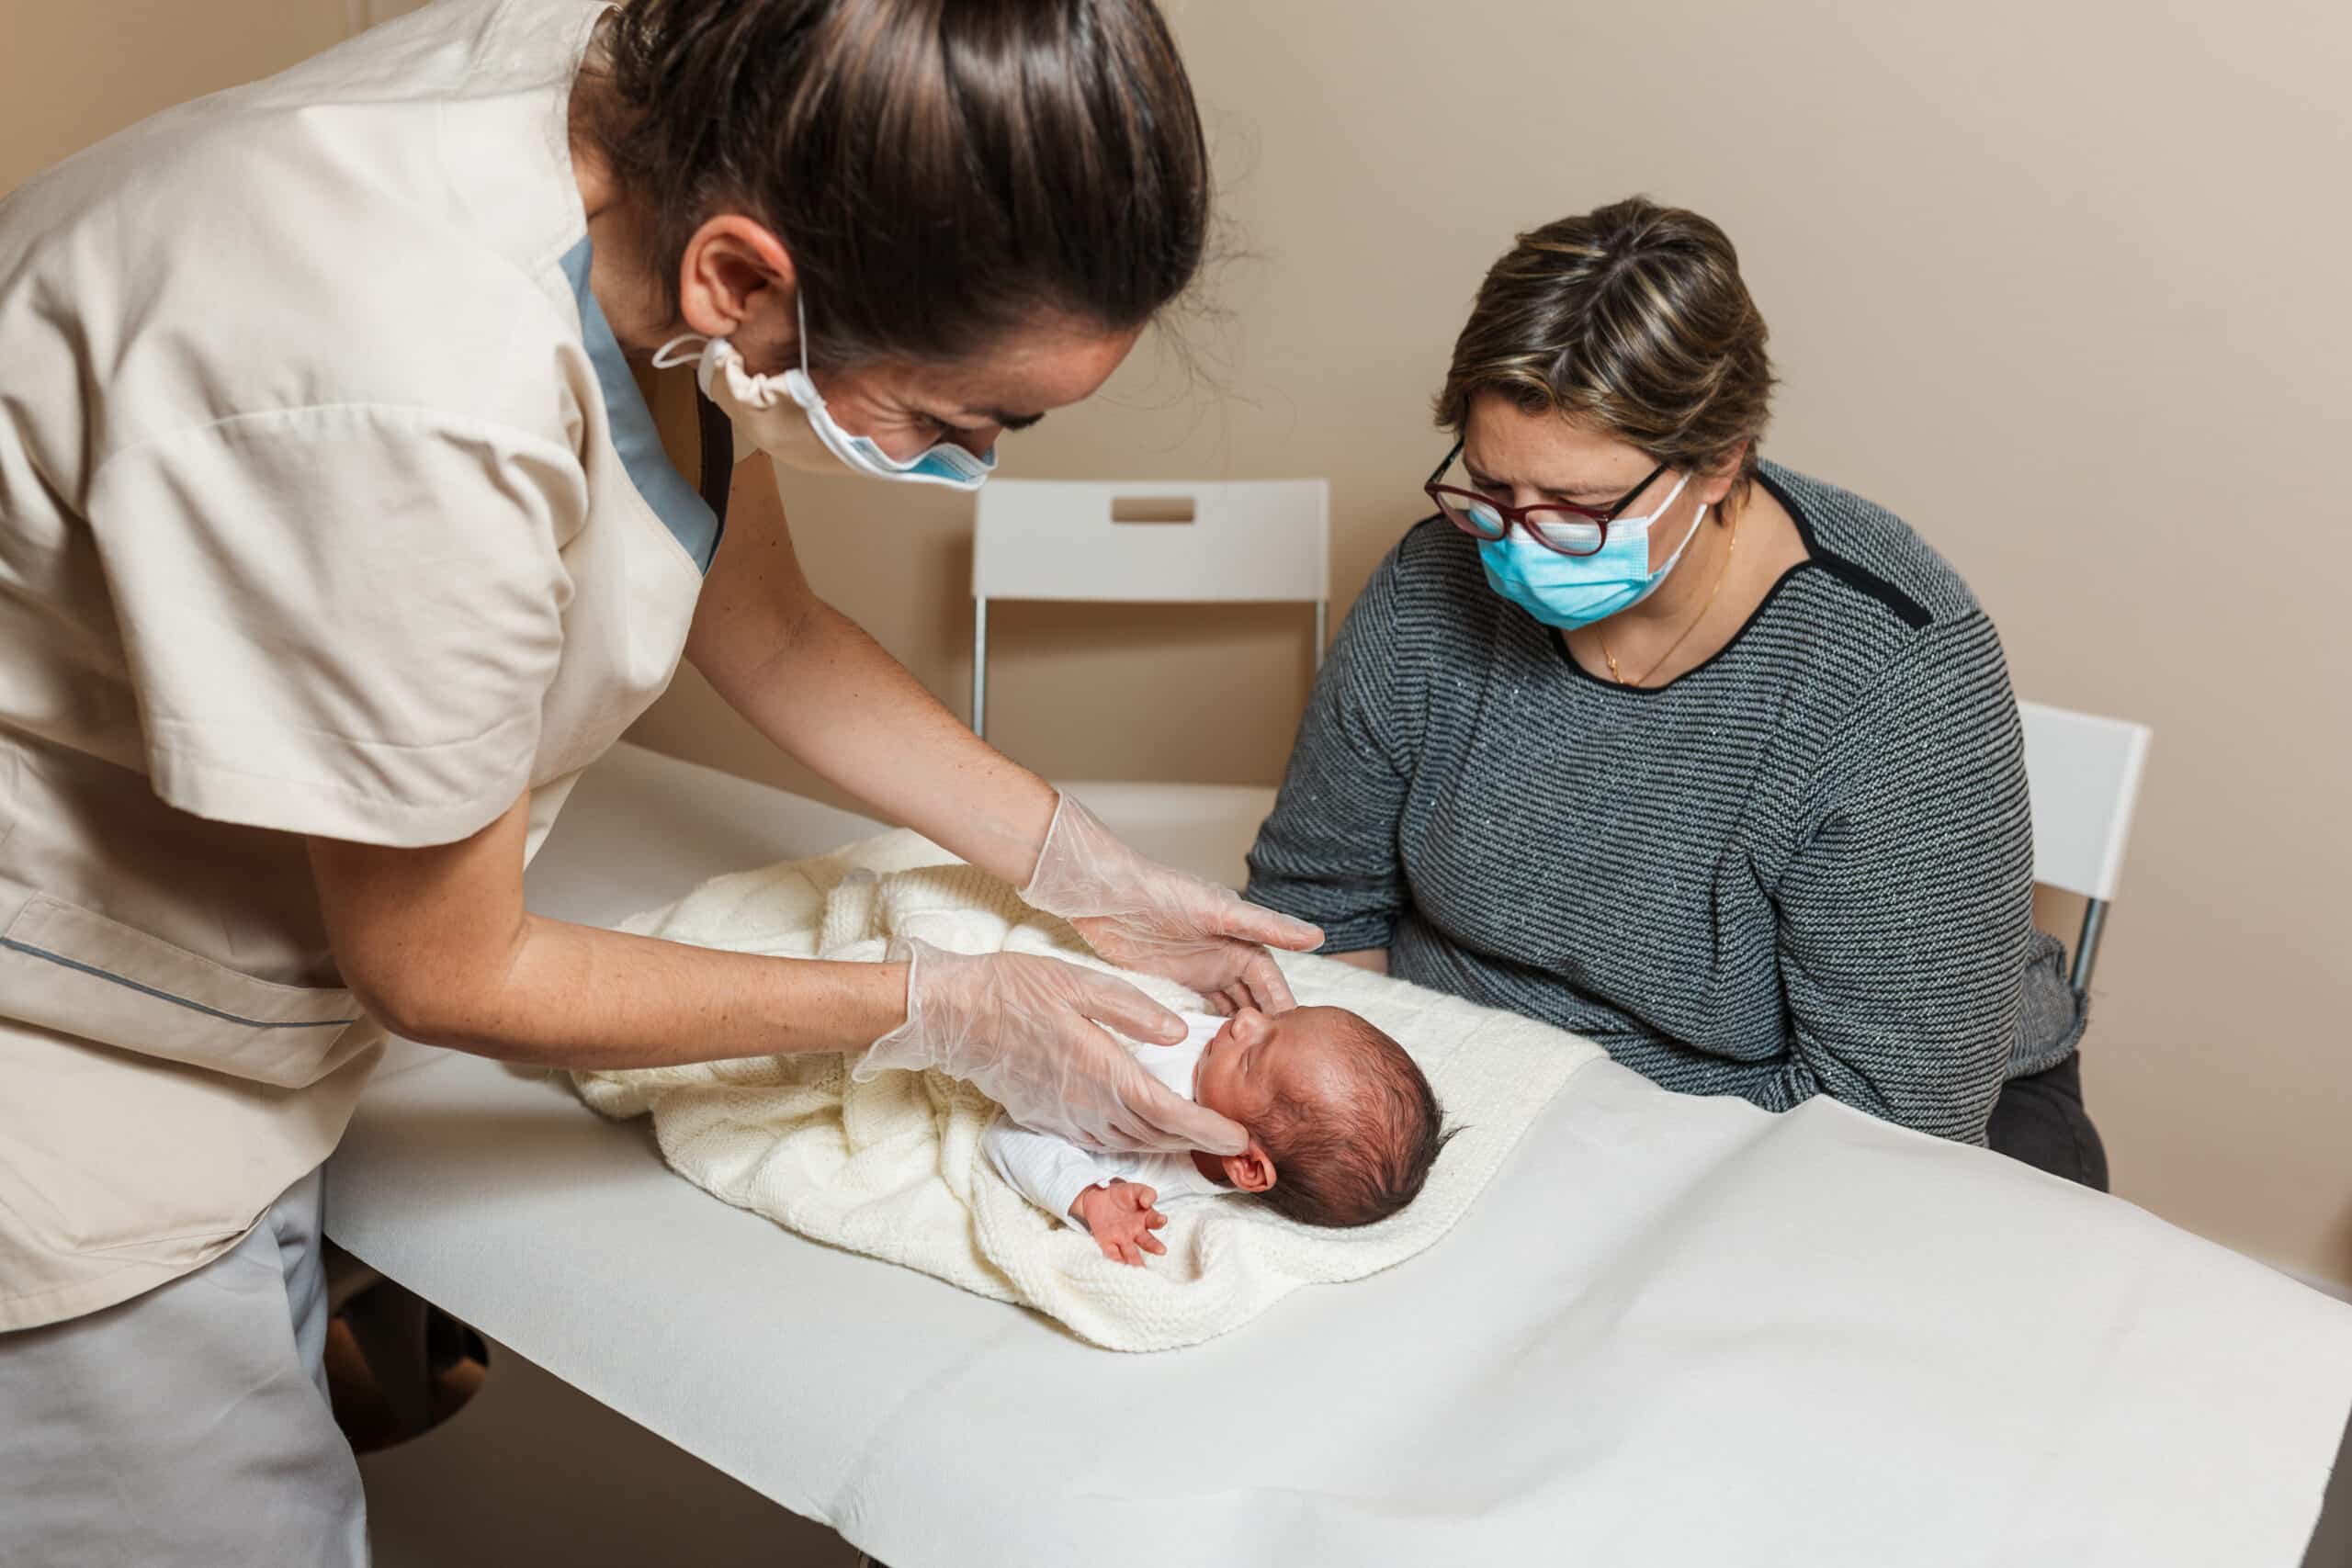 Midwife doing an evaluation of the temporomandibular joints on a baby at a medical center.